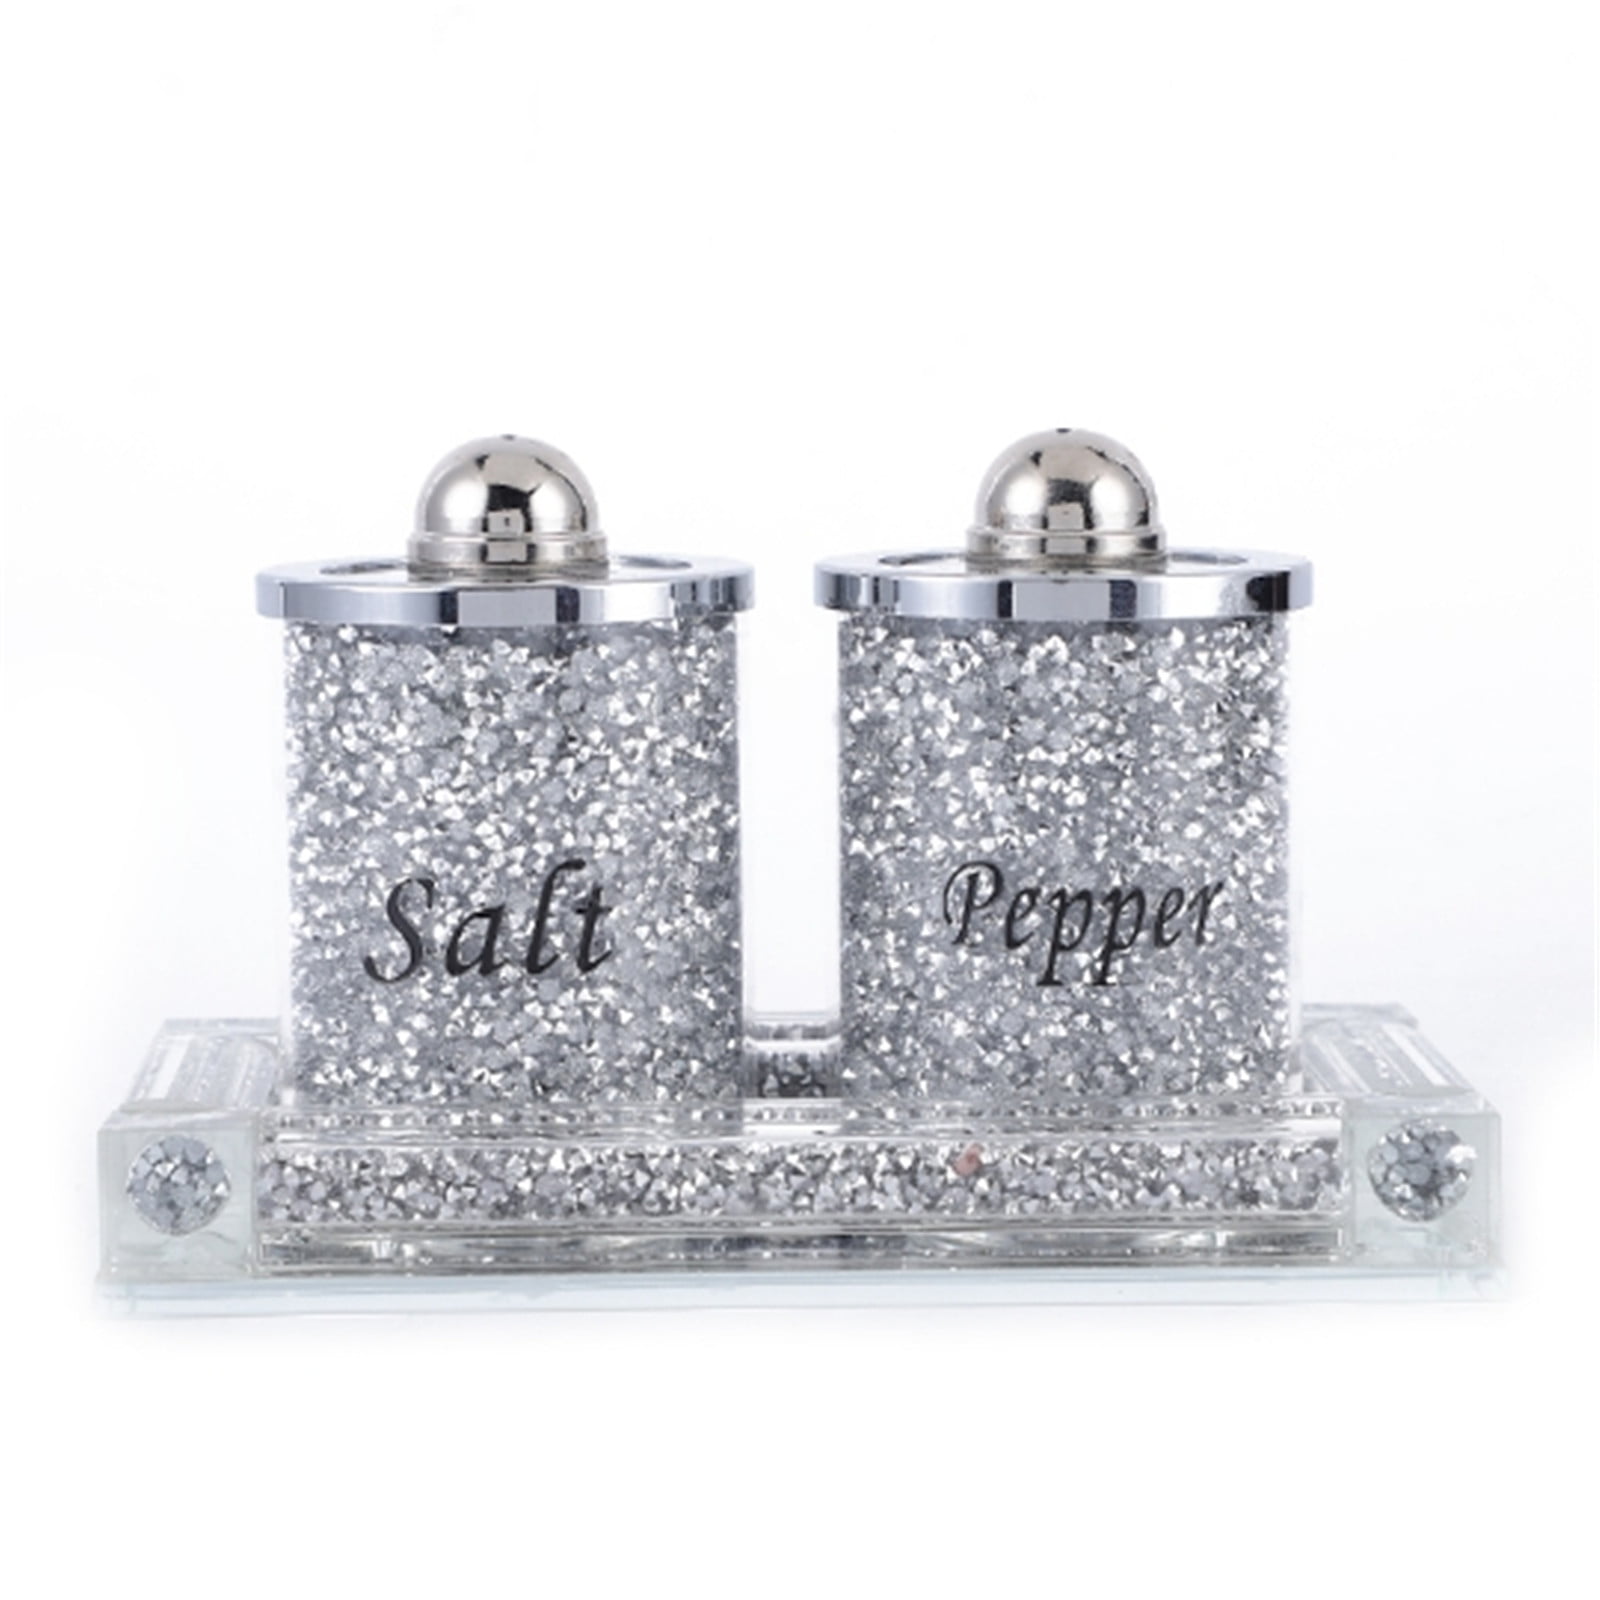 Luxurious Diamond Style Calt Pepper Shaker Glass Jar Canister Set for Kitchen Counter BTSKY Set of 3 Sparky Glass Crystal Crushed Diamonds Salt and Pepper Shakers with Tray 